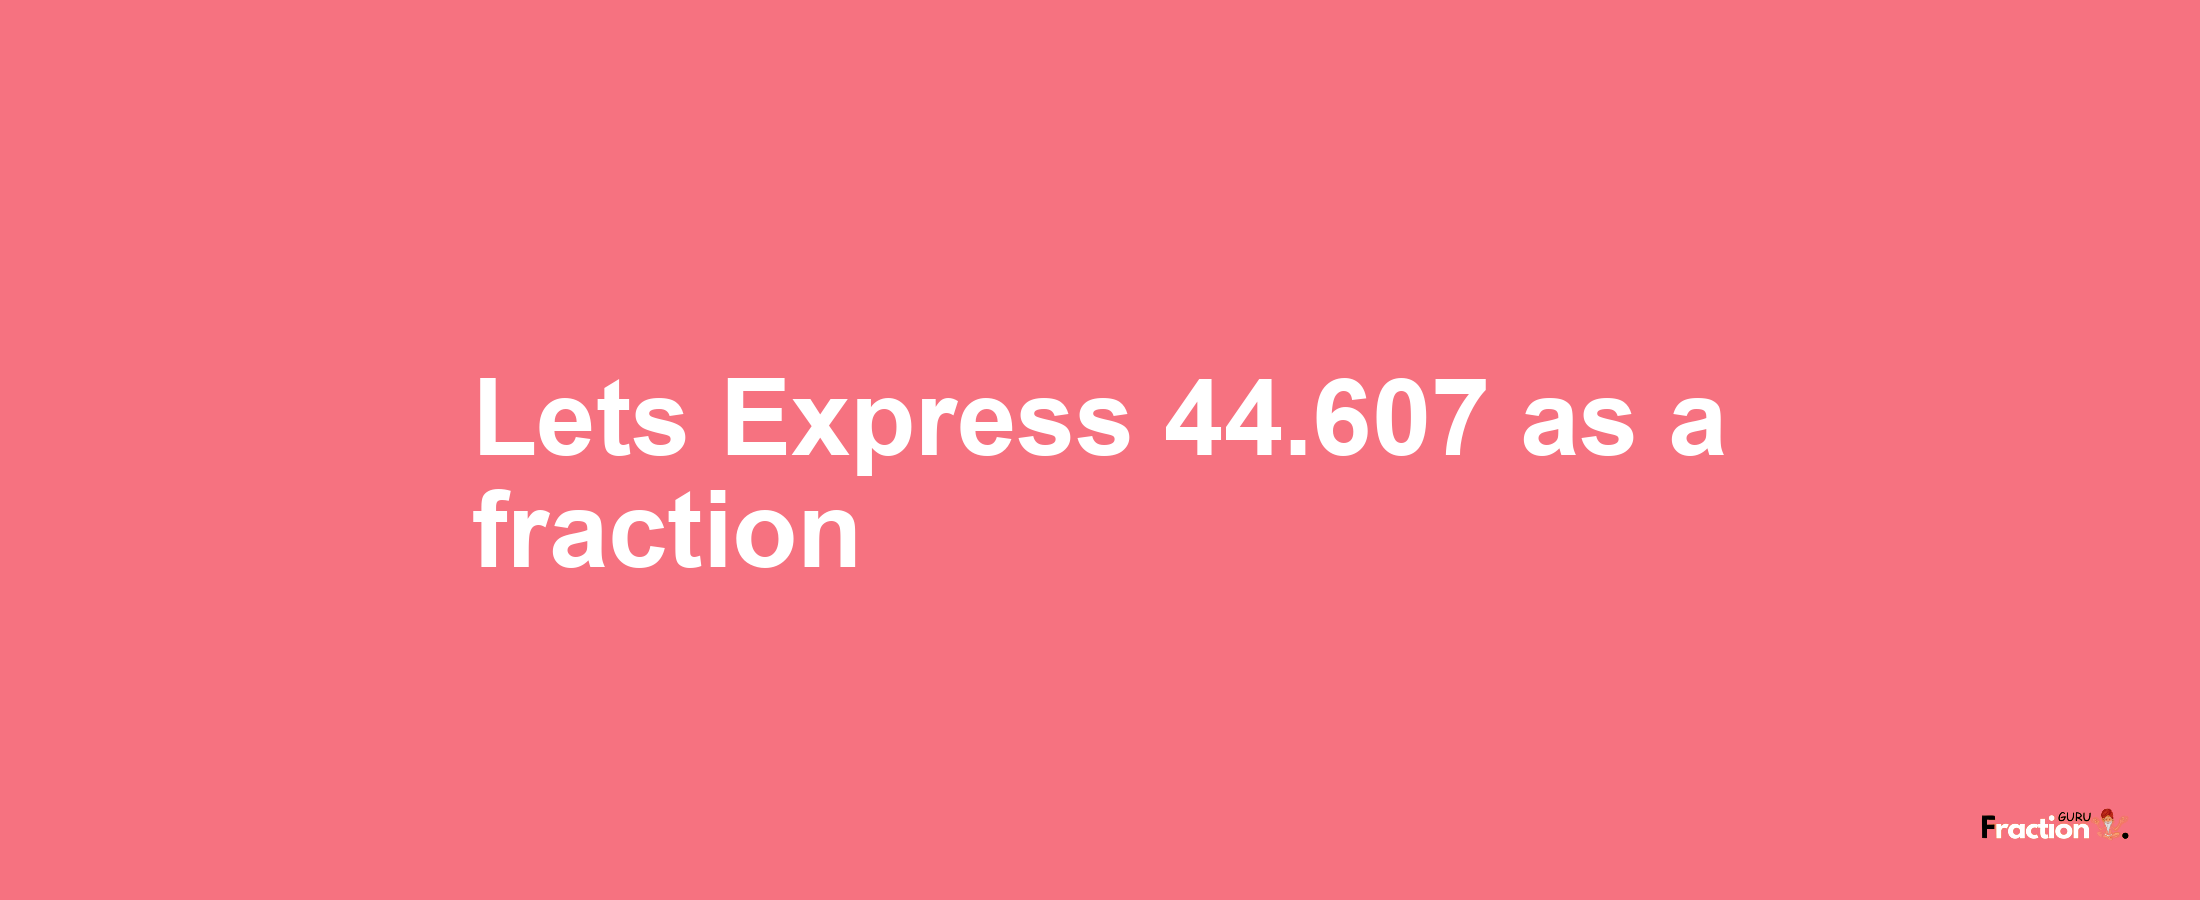 Lets Express 44.607 as afraction